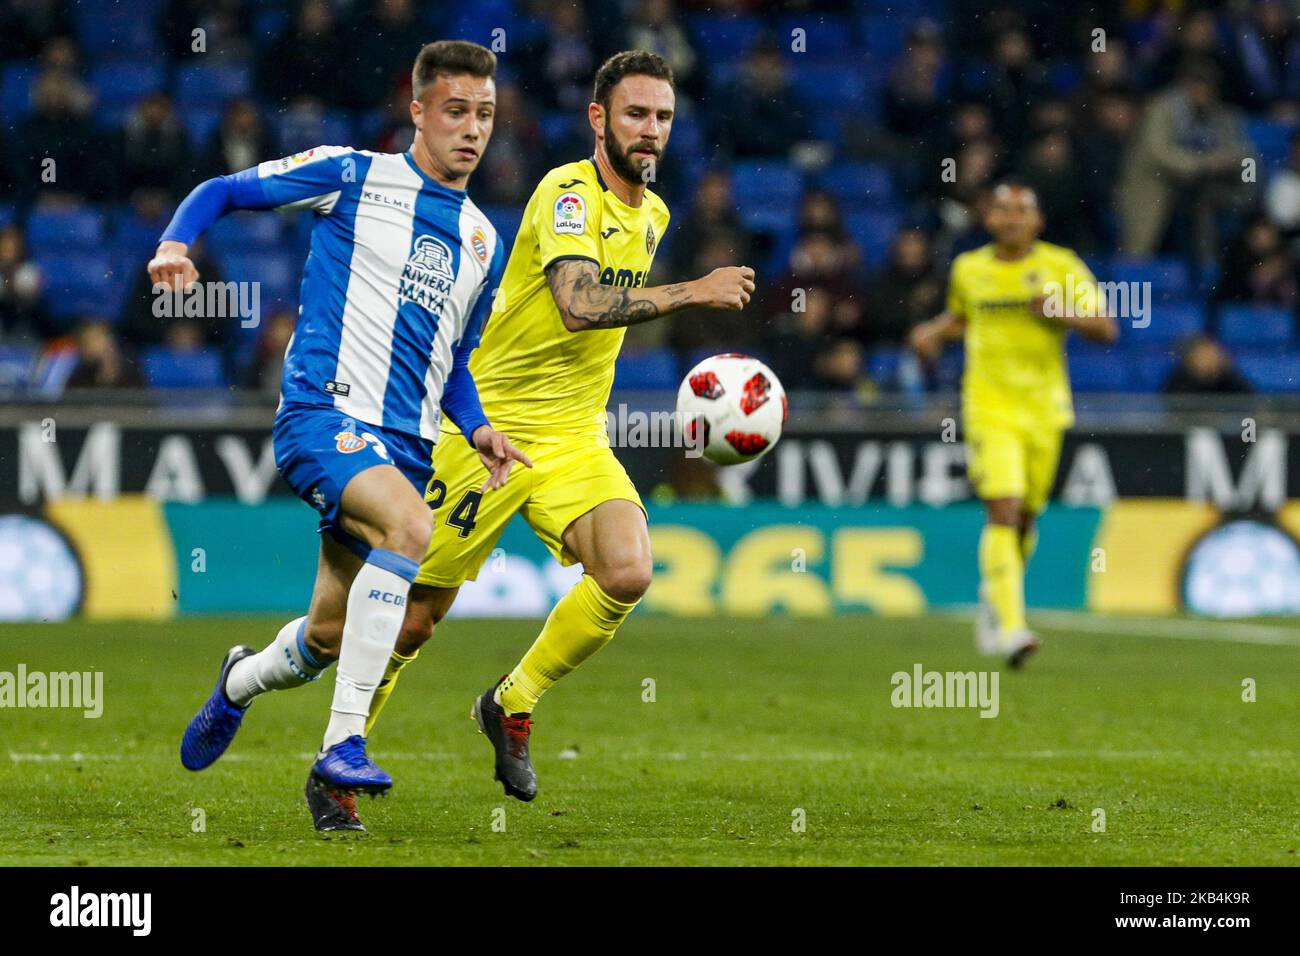 Javi Puado (20) of RCD Espanyol and Miguel Layun (24) of Villarreal CF during the match RCD Espanyol v Villarreal CF, for the round of 16 of the Copa del Rey played at Camp Nou on January 17, 2019 in Barcelona, Spain. (Photo by Mikel Trigueros/Urbanandsport / NurPhoto) Stock Photo